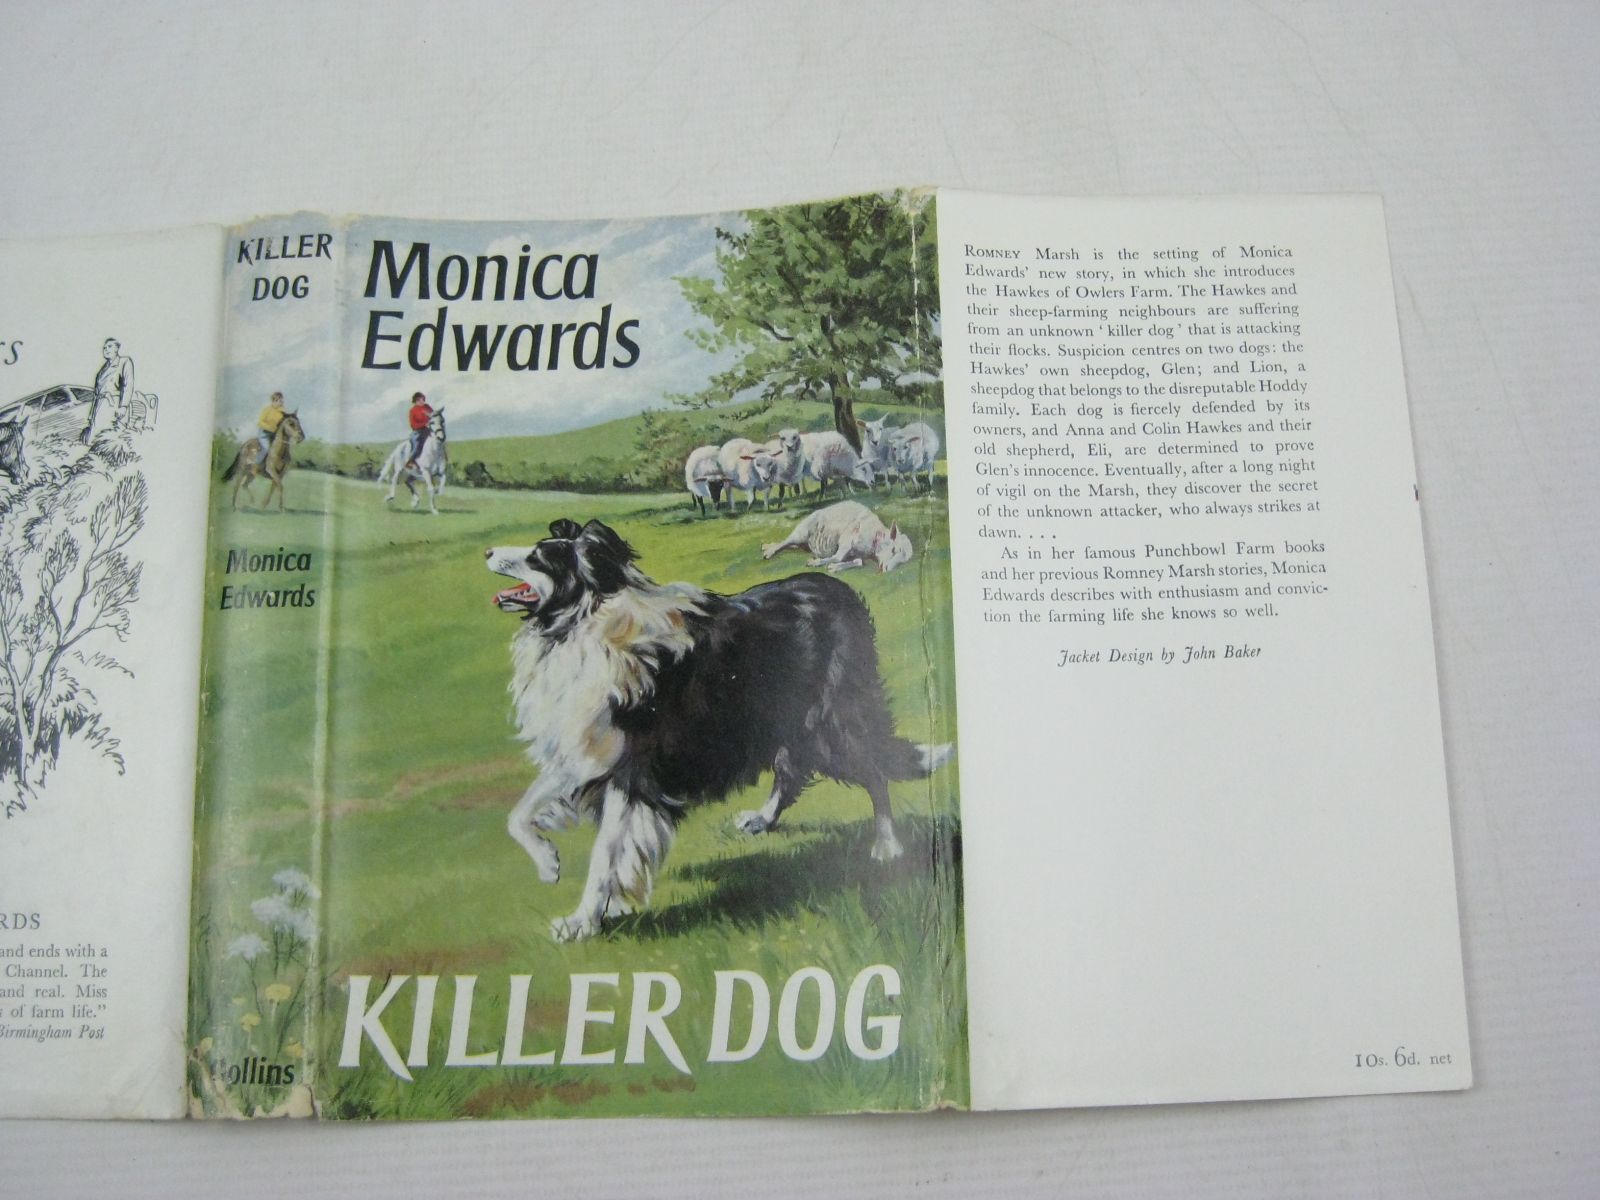 Photo of KILLER DOG written by Edwards, Monica illustrated by Rose, Sheila published by Collins (STOCK CODE: 1504971)  for sale by Stella & Rose's Books